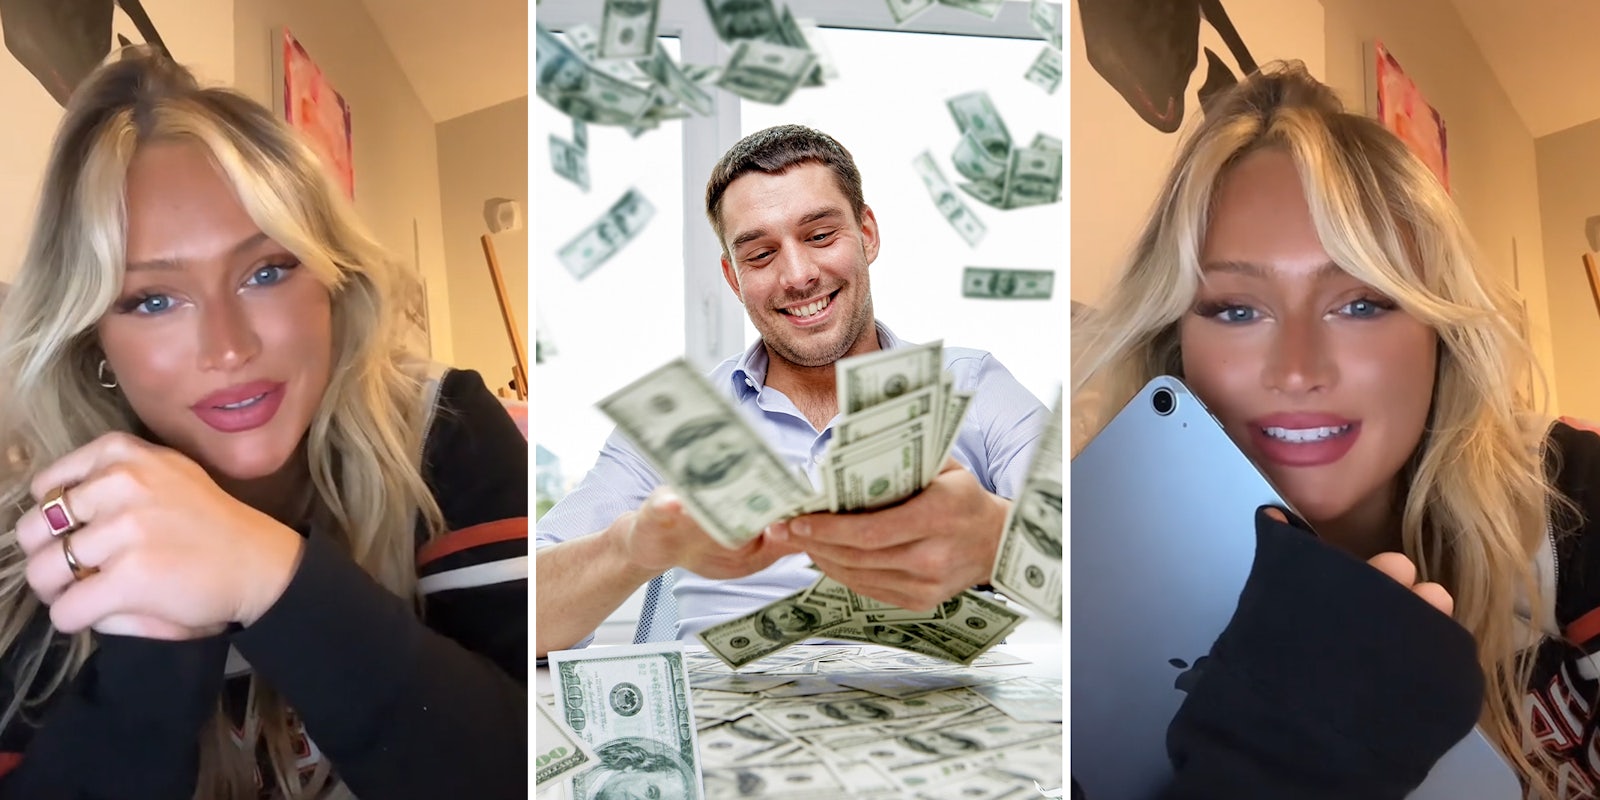 Woman says ‘random guy’ offered her $100,000 to quit her job.